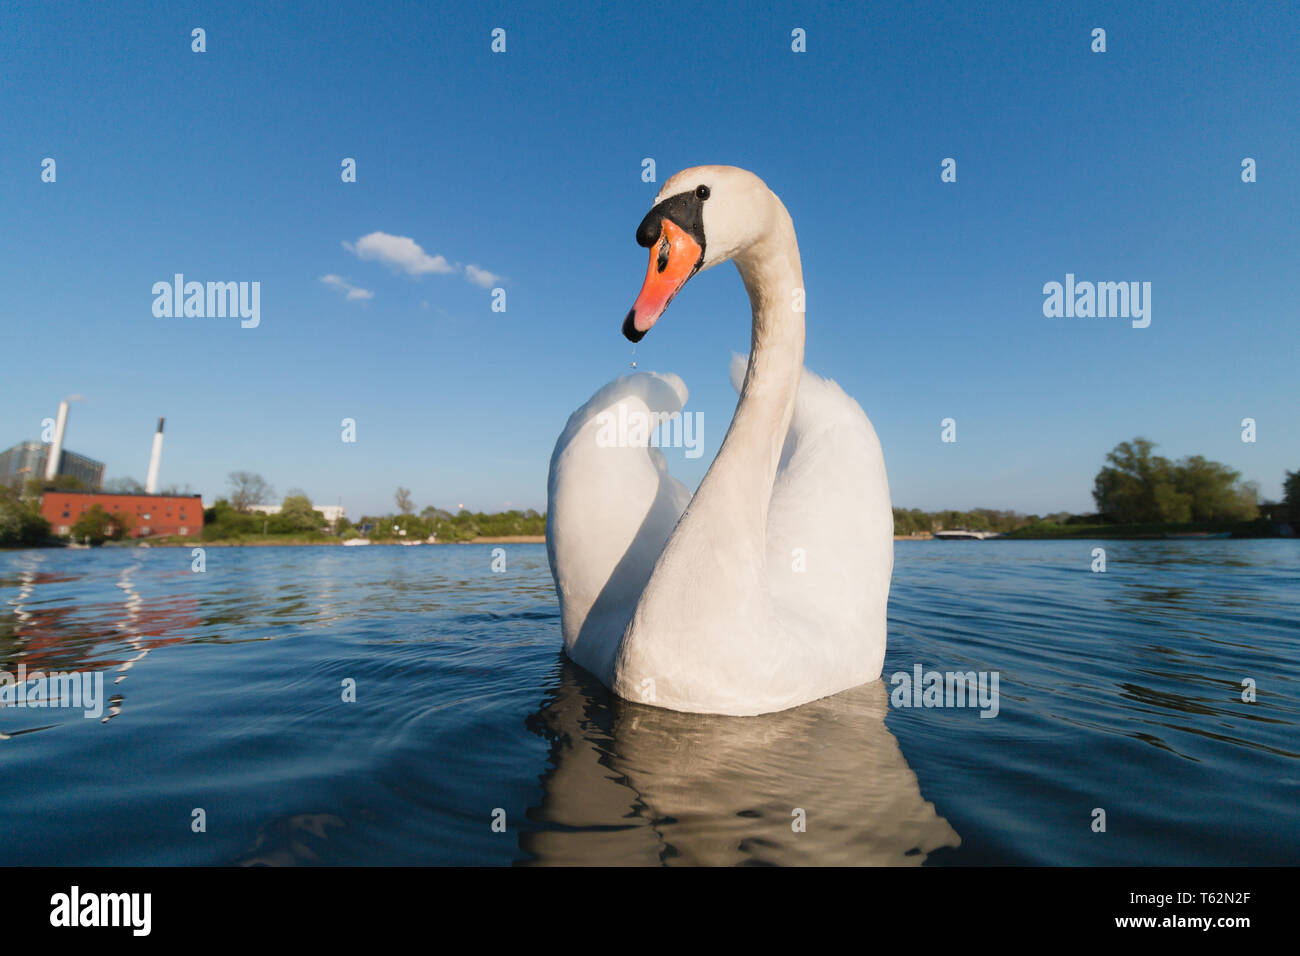 Swan in blue water wide angle lens, low angle shot Stock Photo